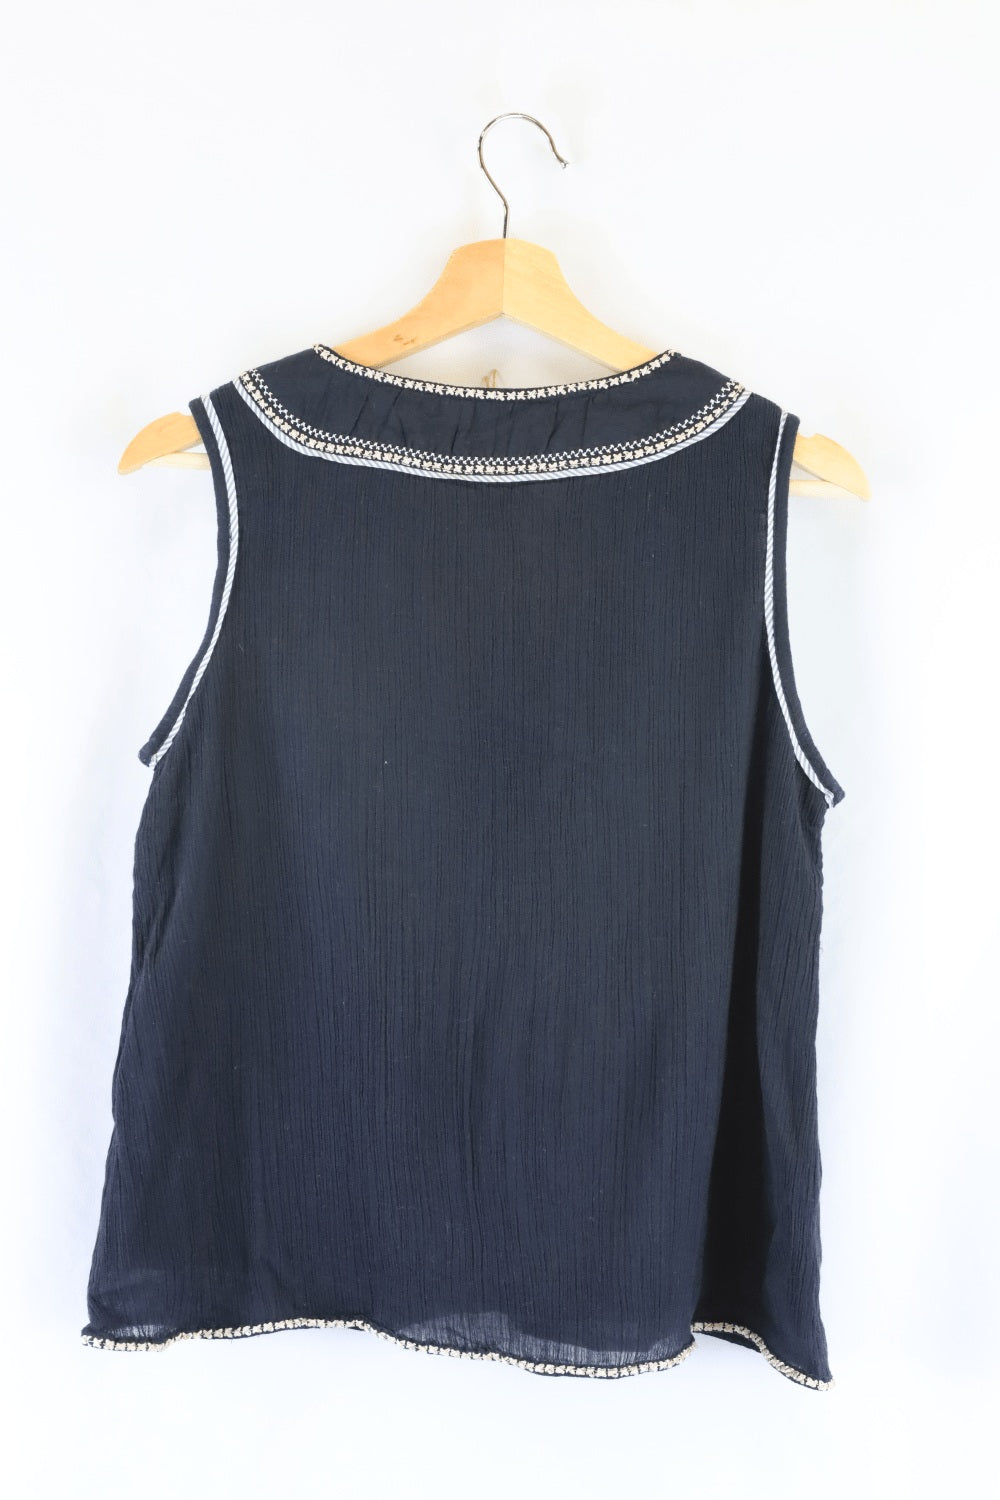 Flannel Black Embroidered Singlet XS